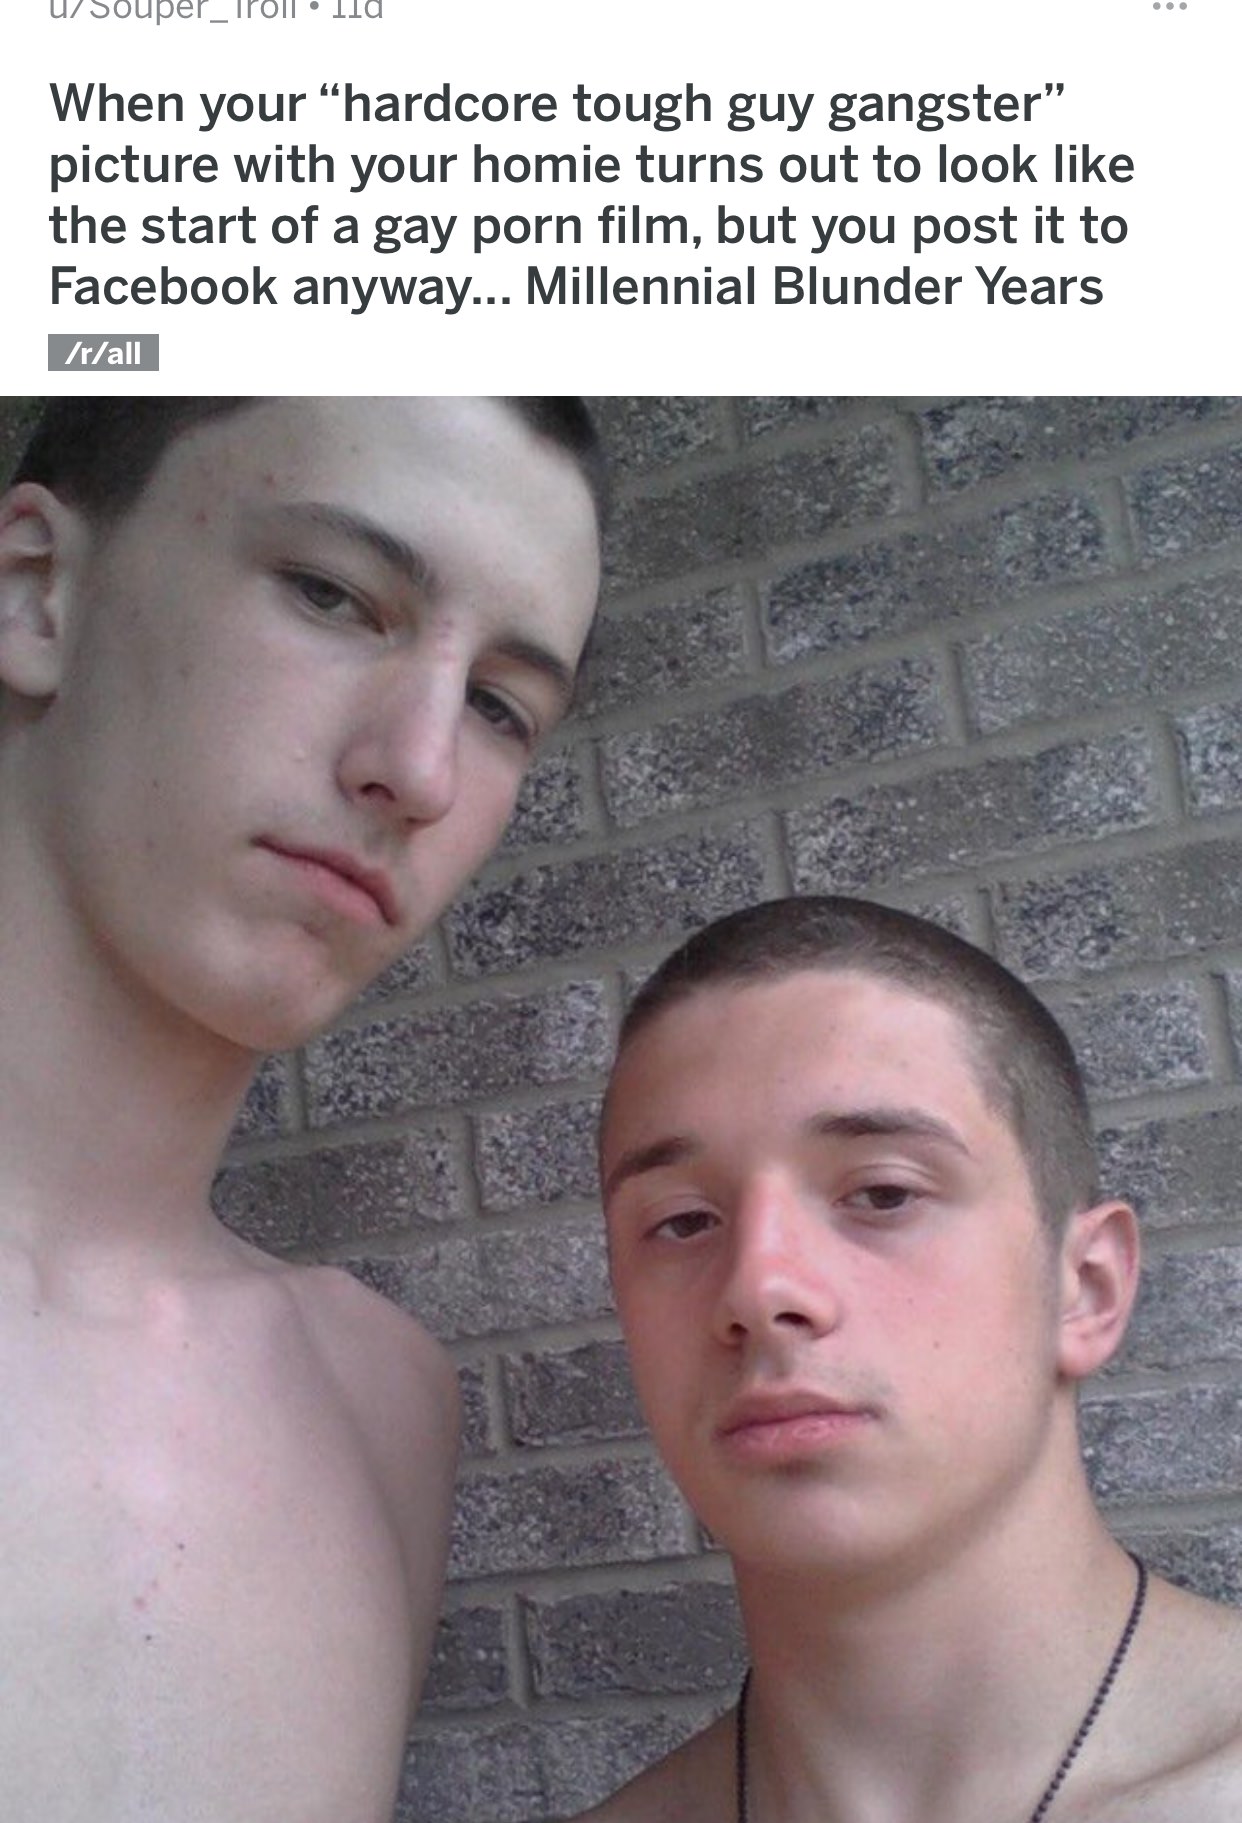 boy - USoupel_lPoll Ild When your "hardcore tough guy gangster" picture with your homie turns out to look the start of a gay porn film, but you post it to Facebook anyway... Millennial Blunder Years rall